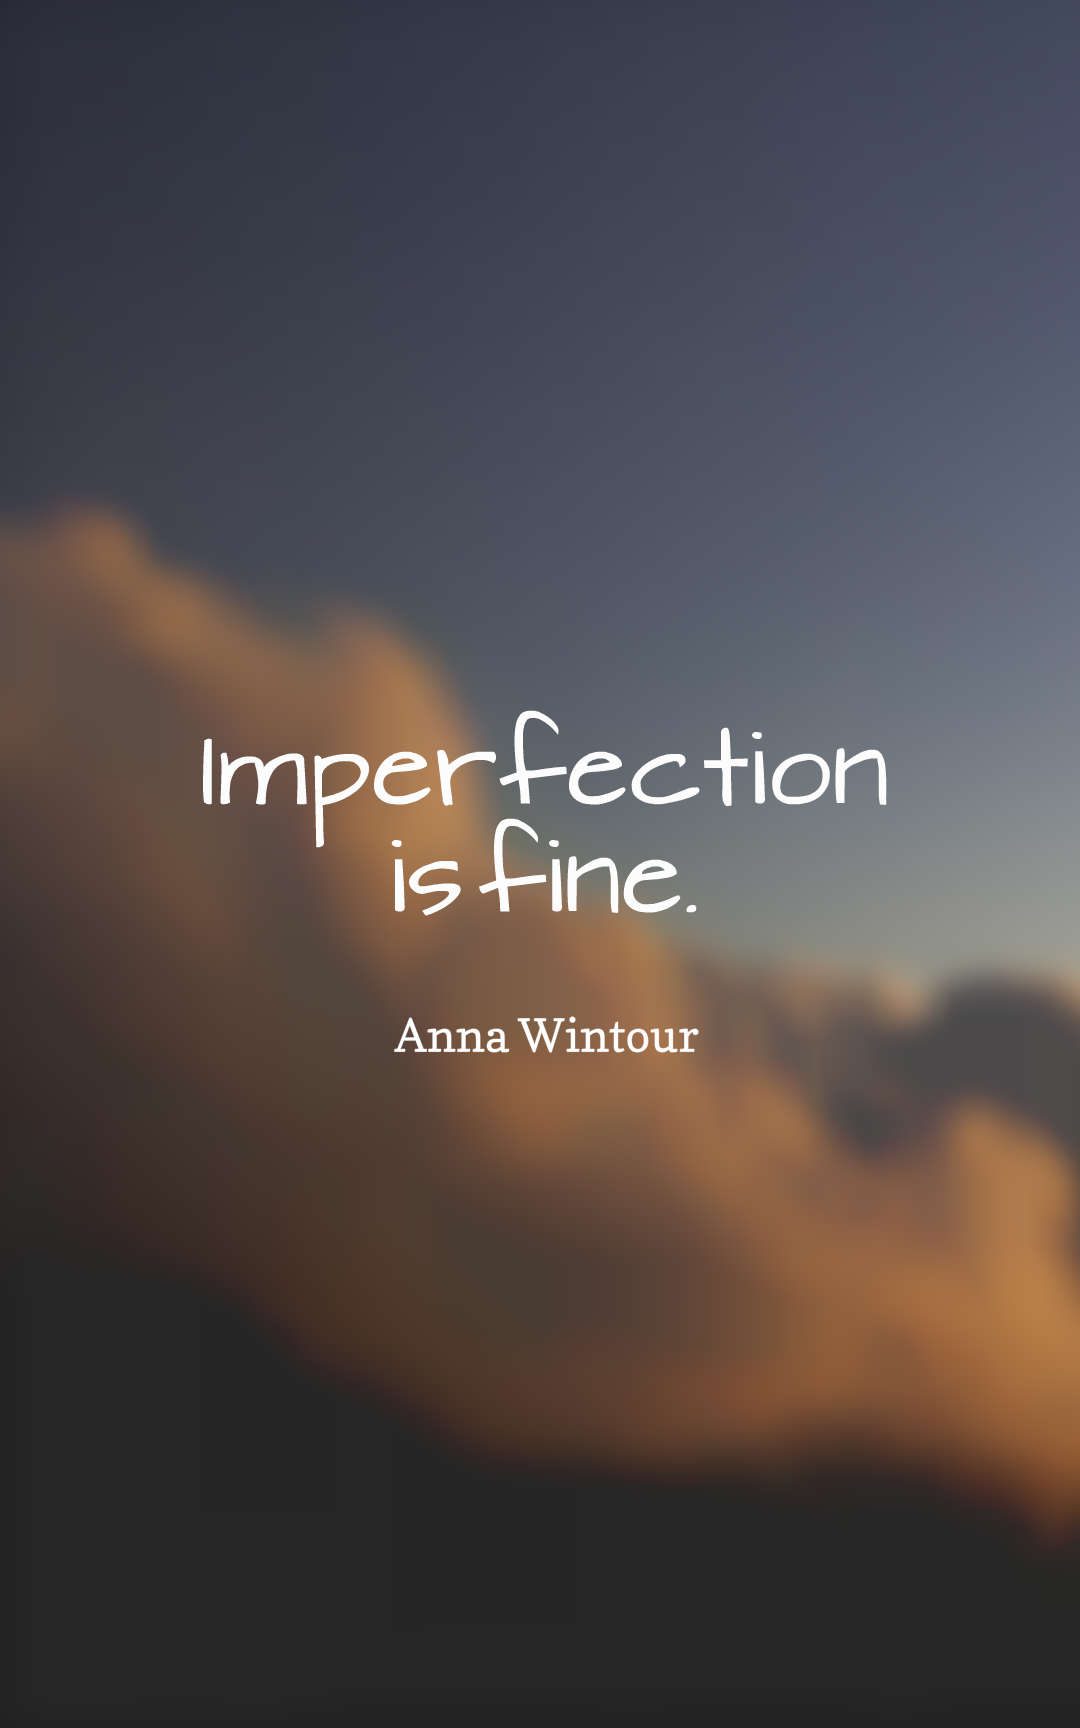 Imperfection is fine.